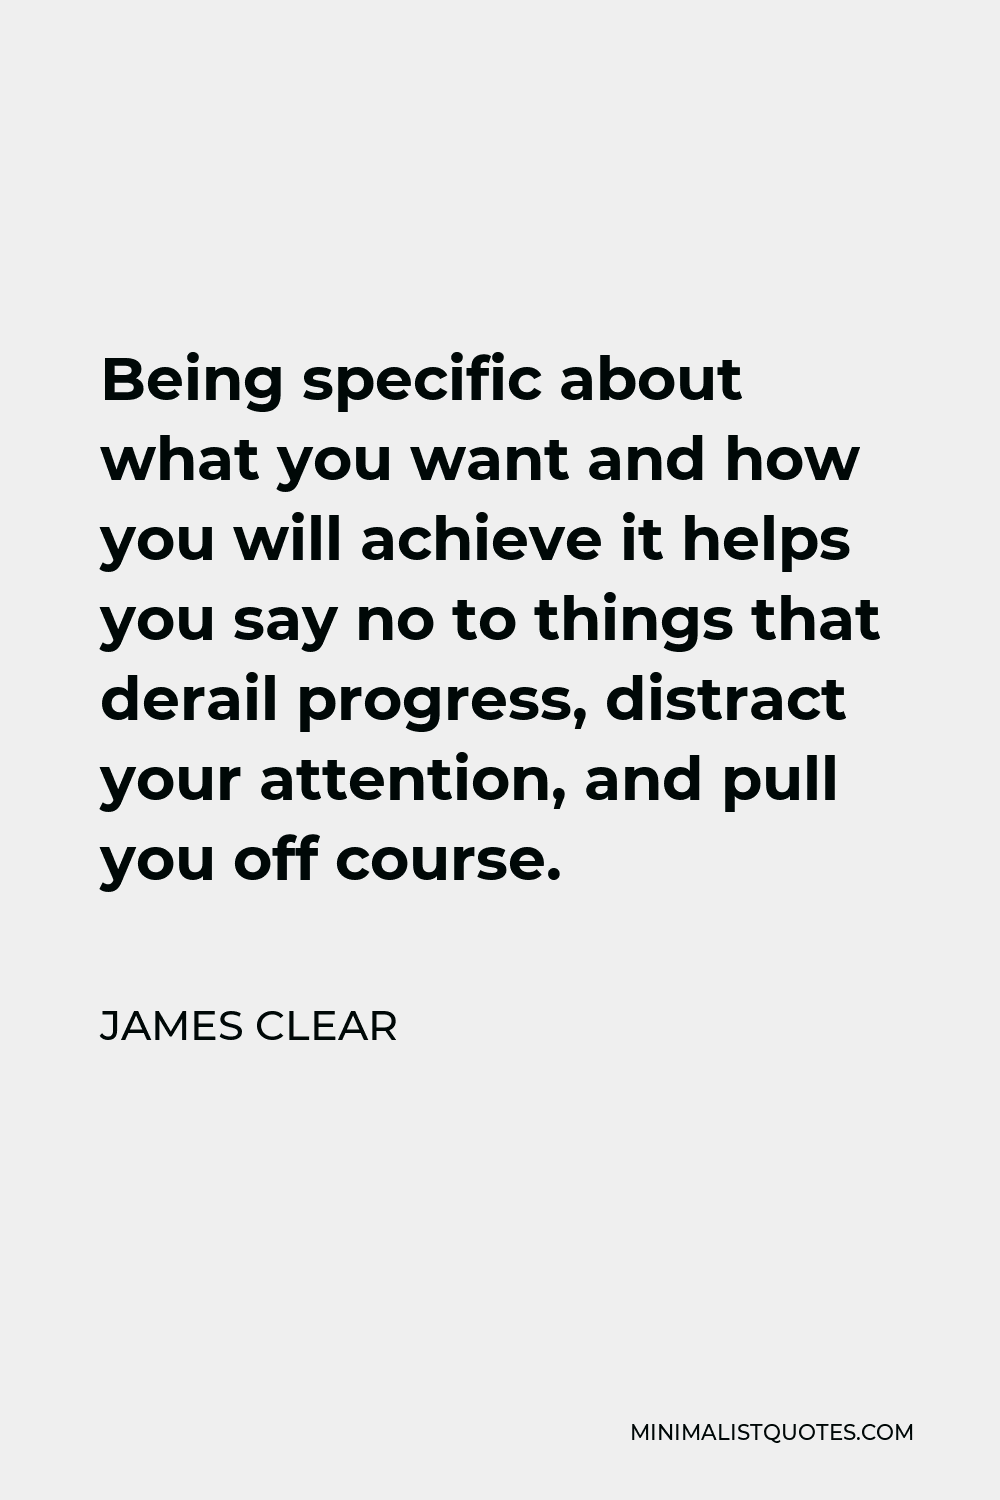 James Clear Quote - Being specific about what you want and how you will achieve it helps you say no to things that derail progress, distract your attention, and pull you off course.